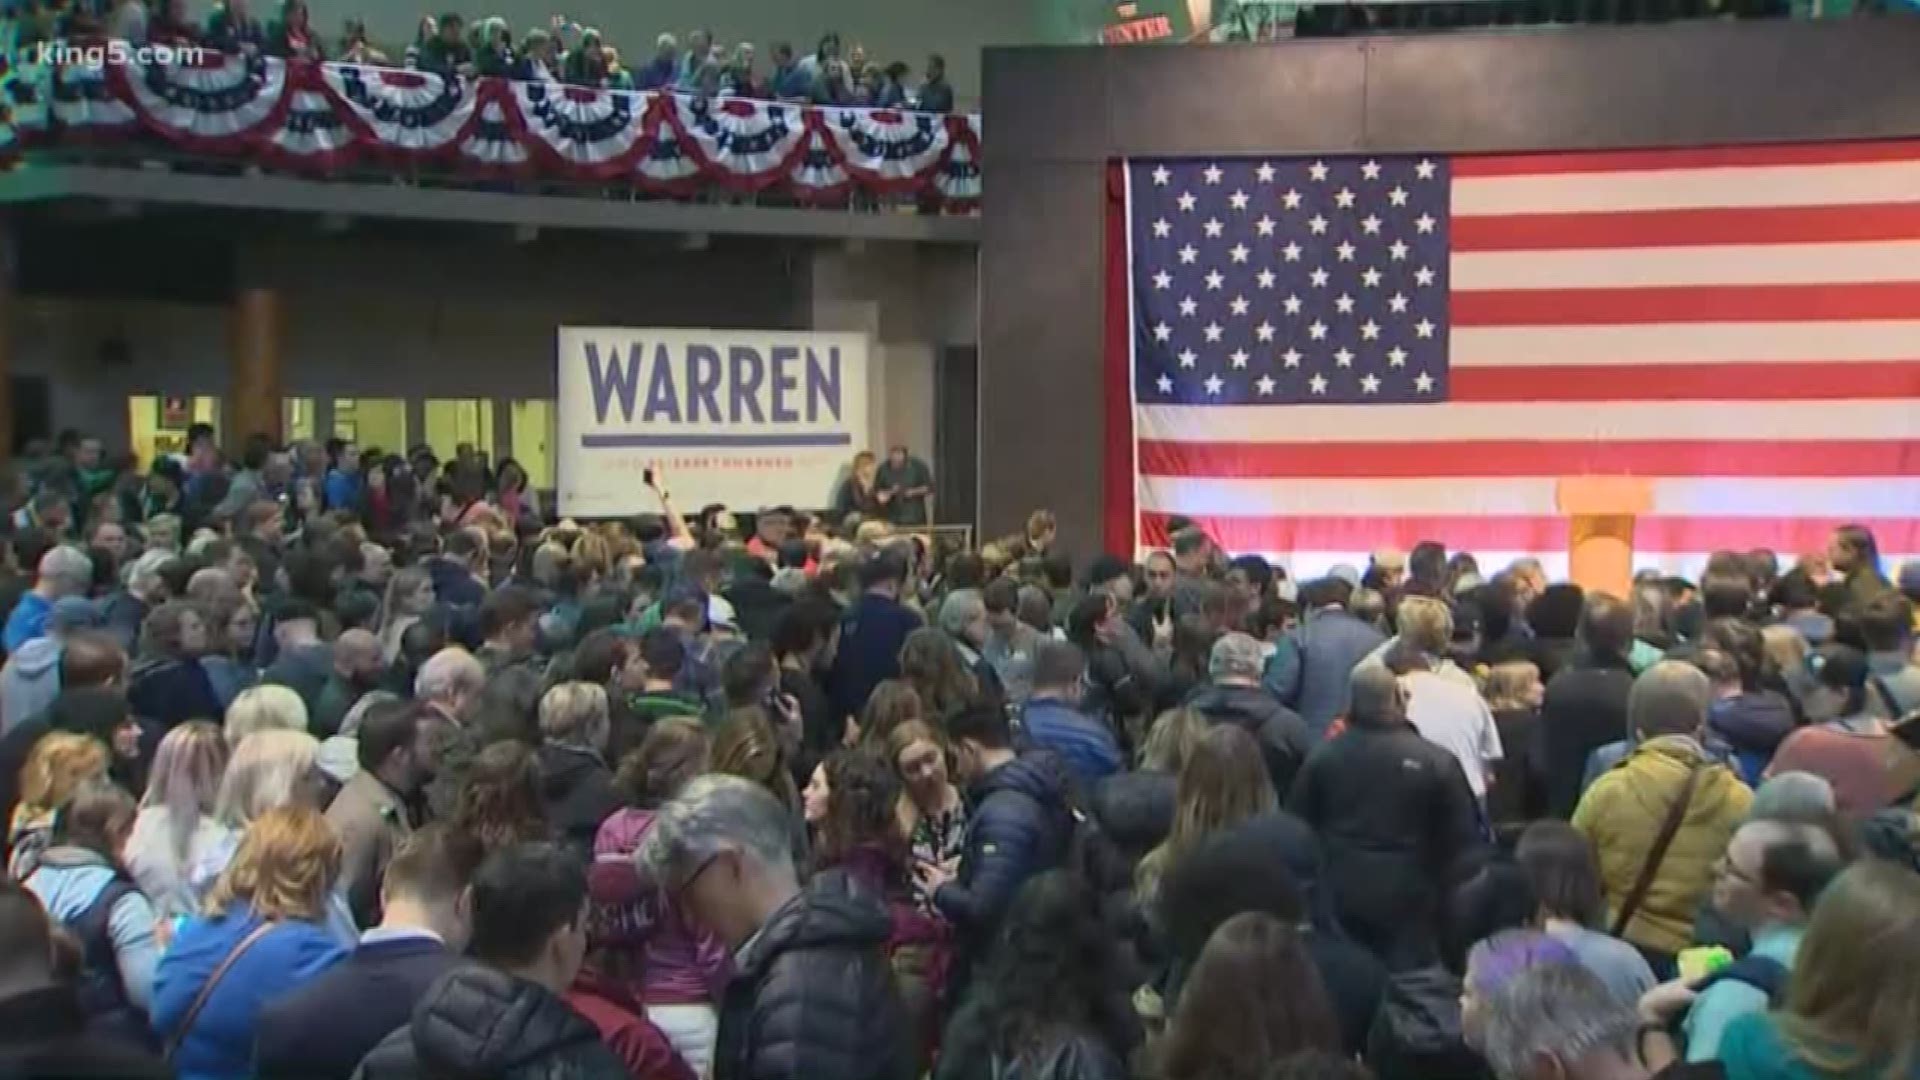 People are gathering at the Seattle Armory in Seattle to hear from Democratic presidential candidate Elizabeth Warren, who is expected to speak at 6 p.m.